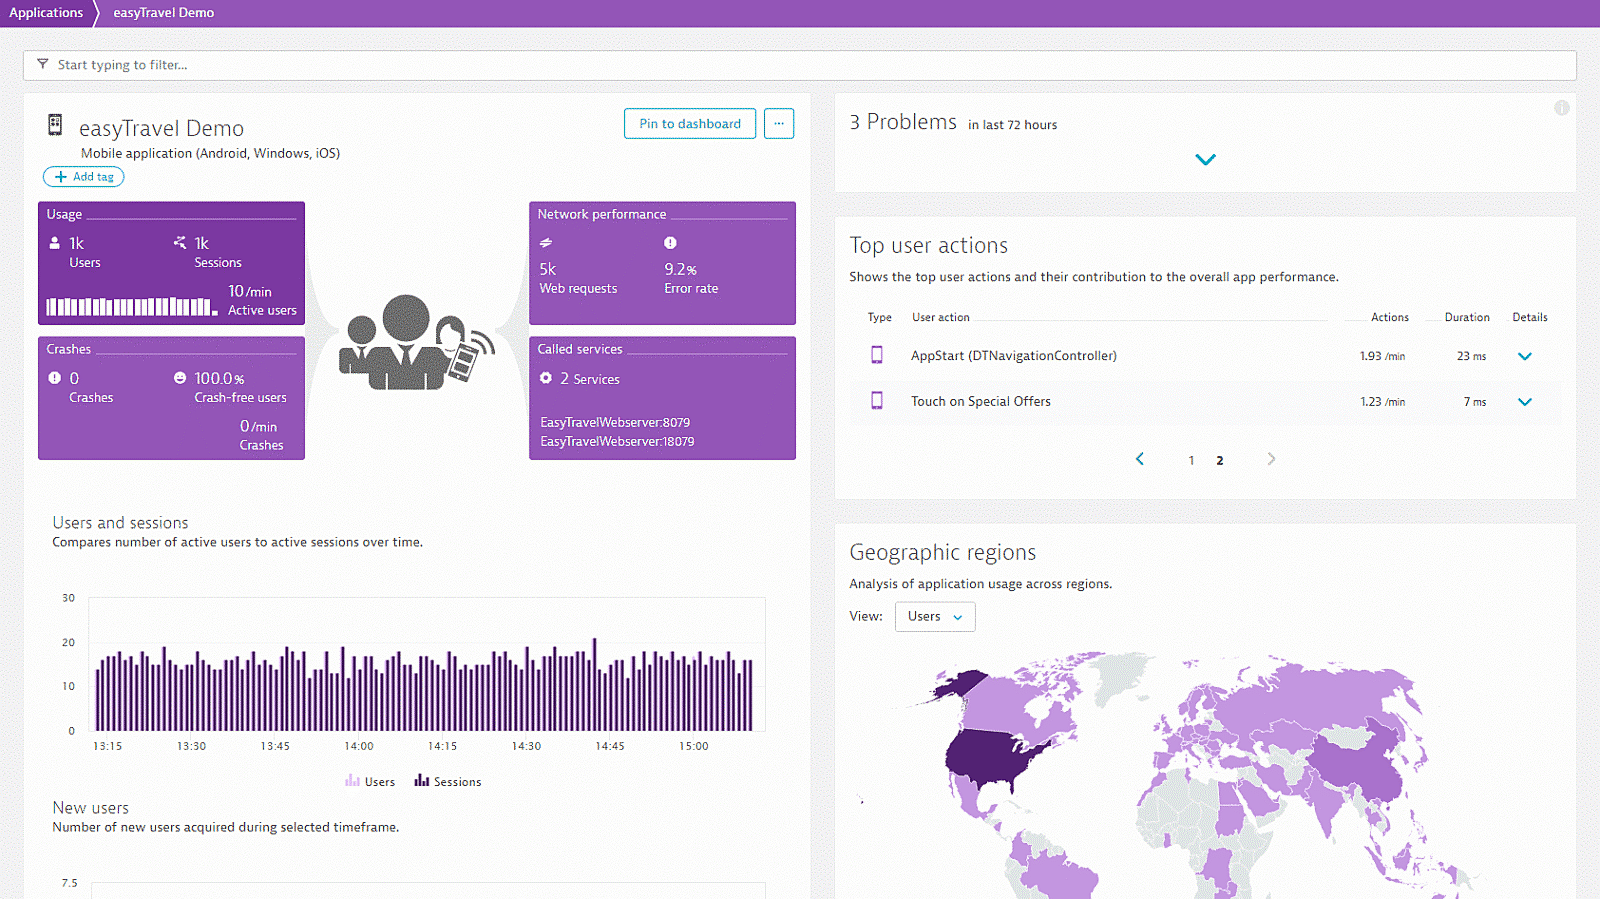 Dashboard overview of performance issues